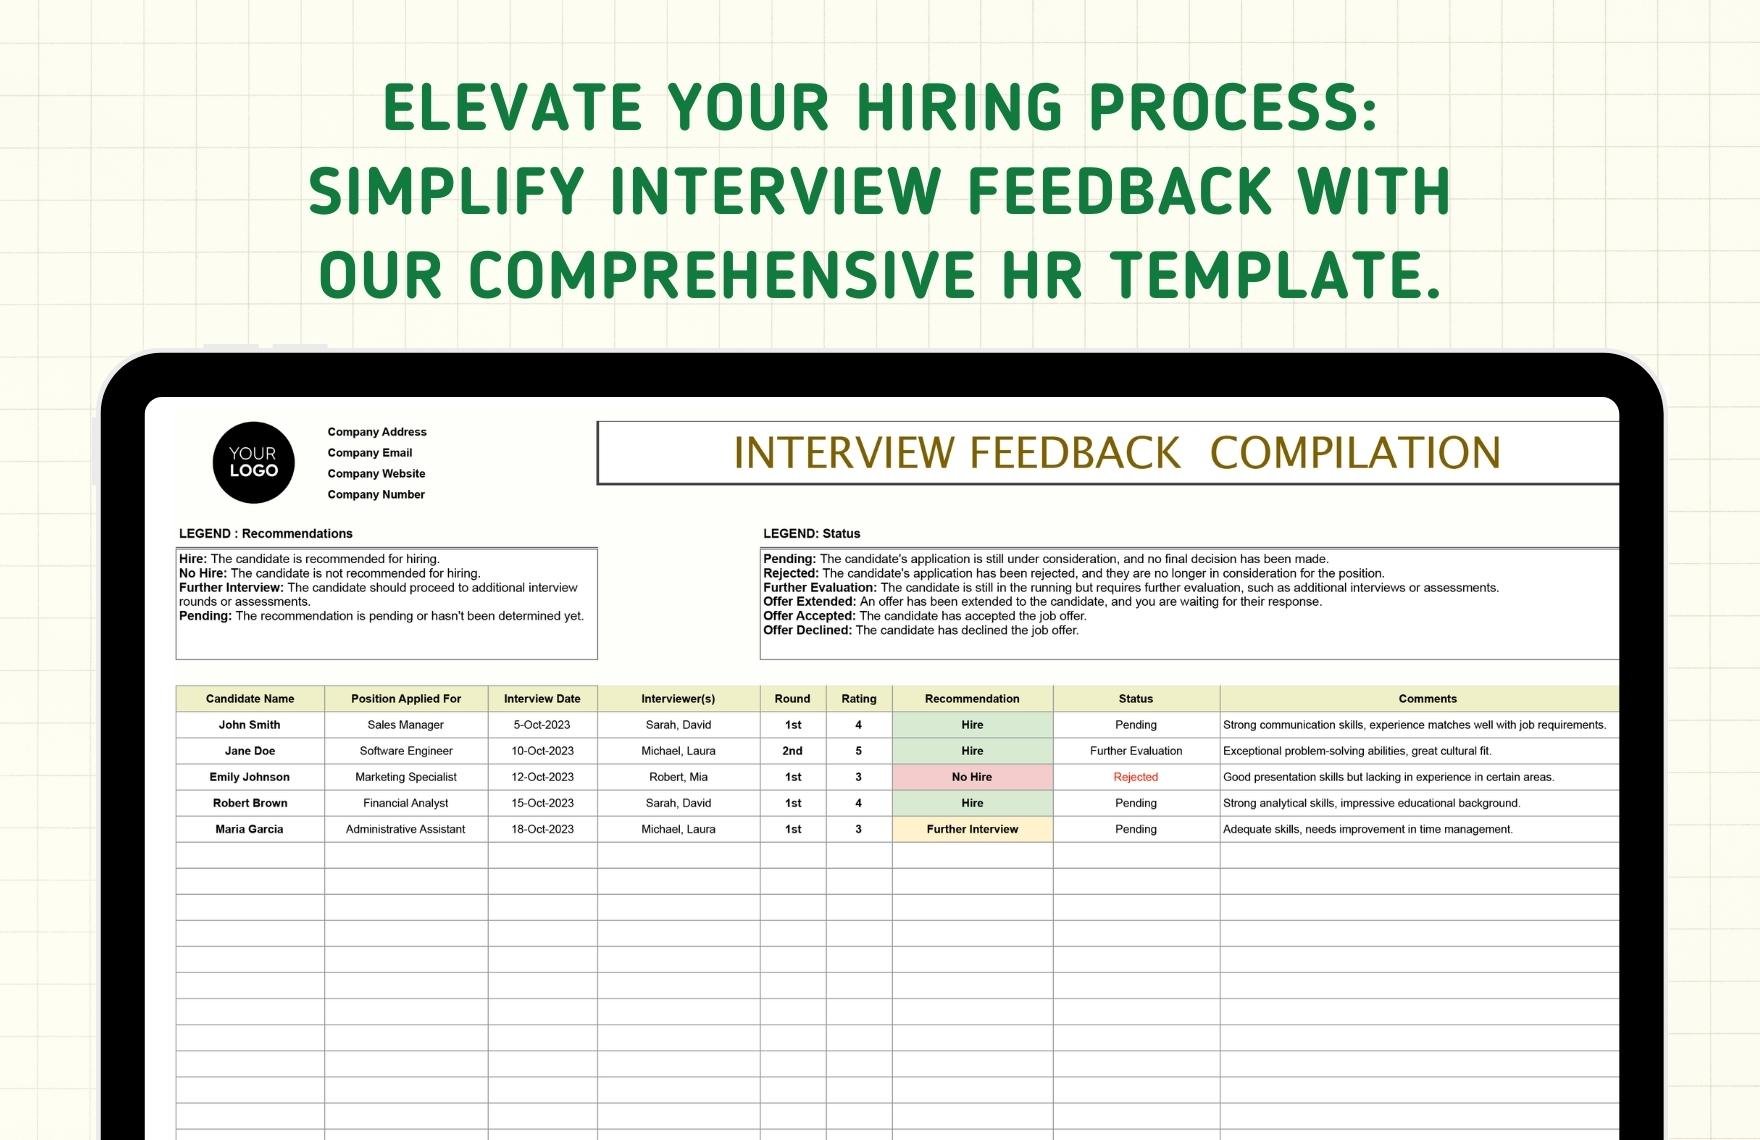 Interview Feedback Compilation HR Template